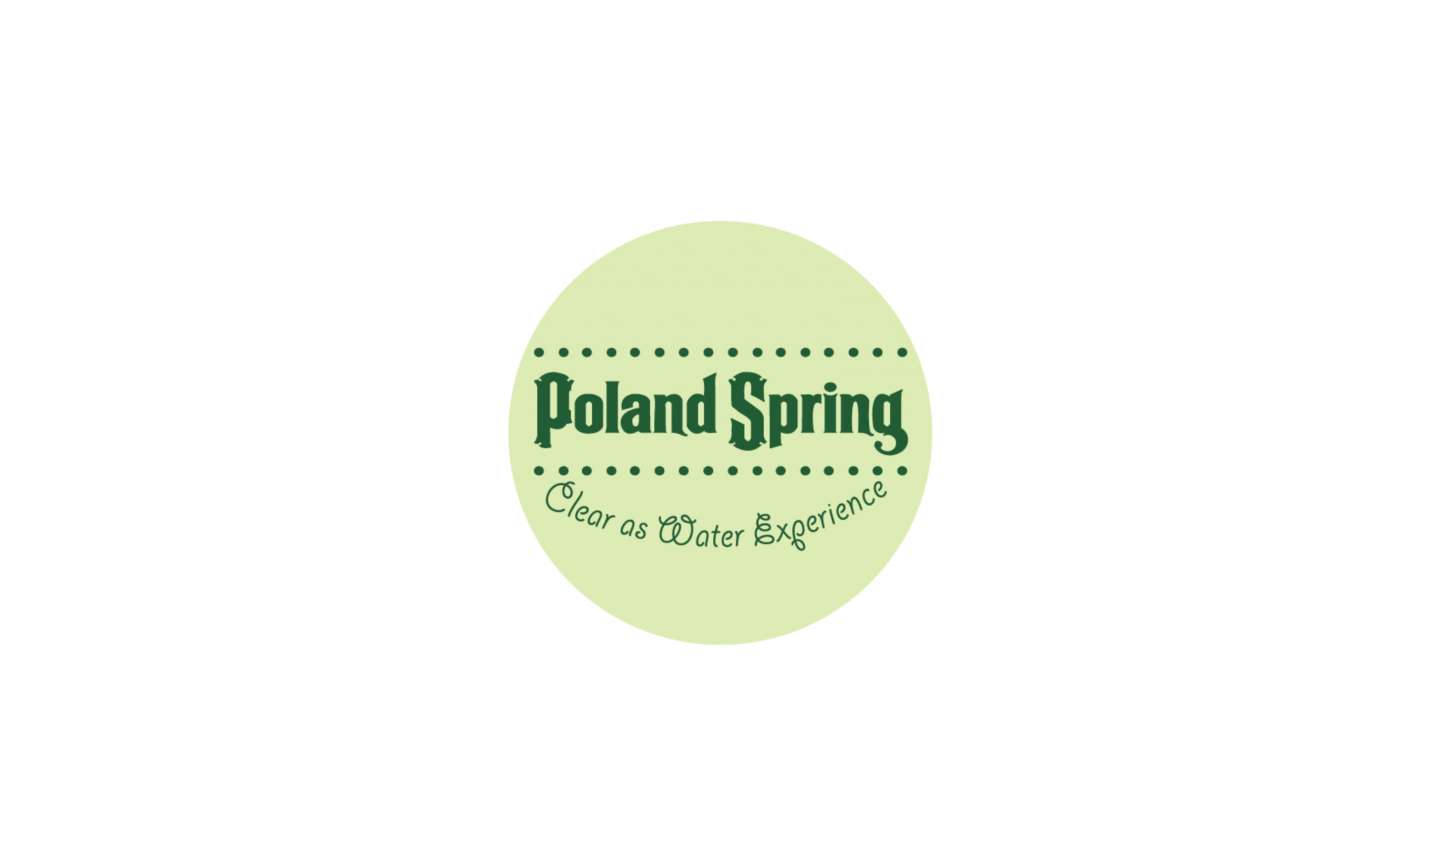 Poland Spring's Clear as Water Experience